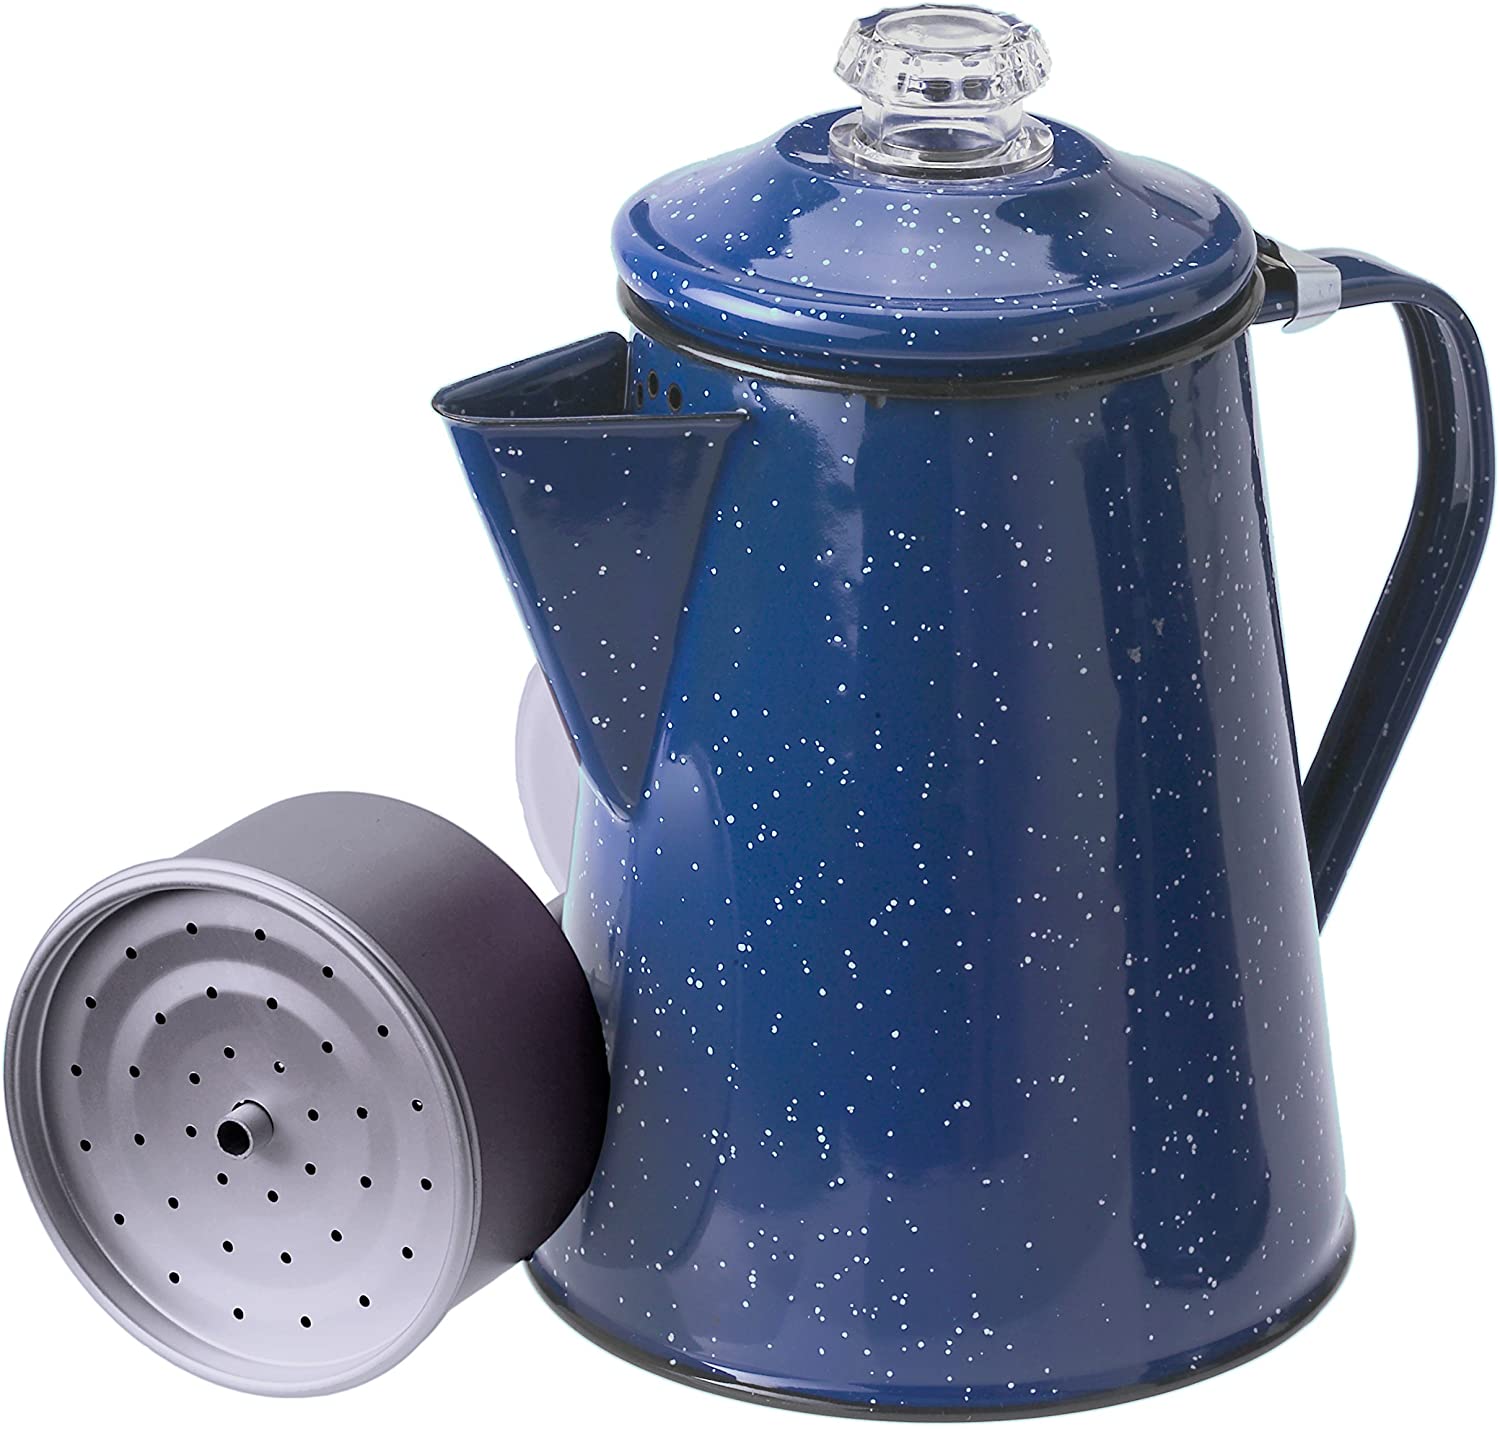 G S I Sports 15154 12 Cup Enamelware Percolator Coffee Pot